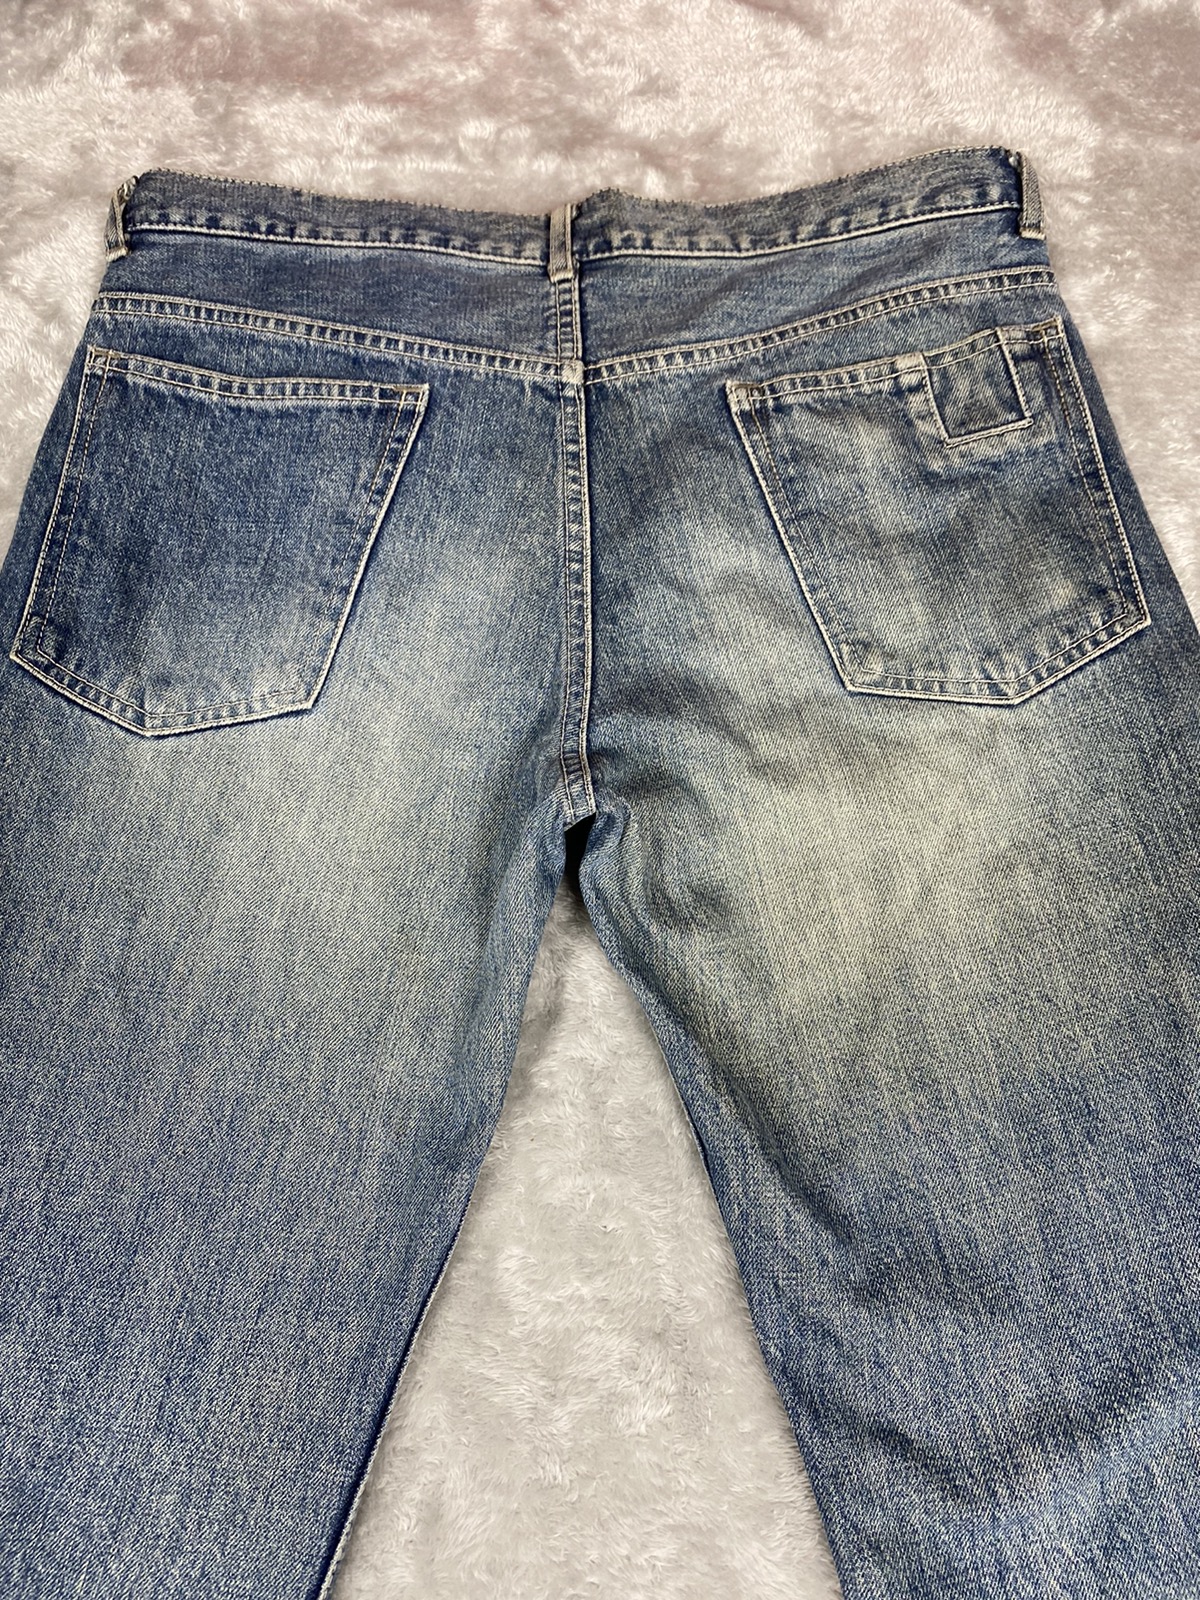 N. Hollywood Denim Faded Jeans. S0208 - 14